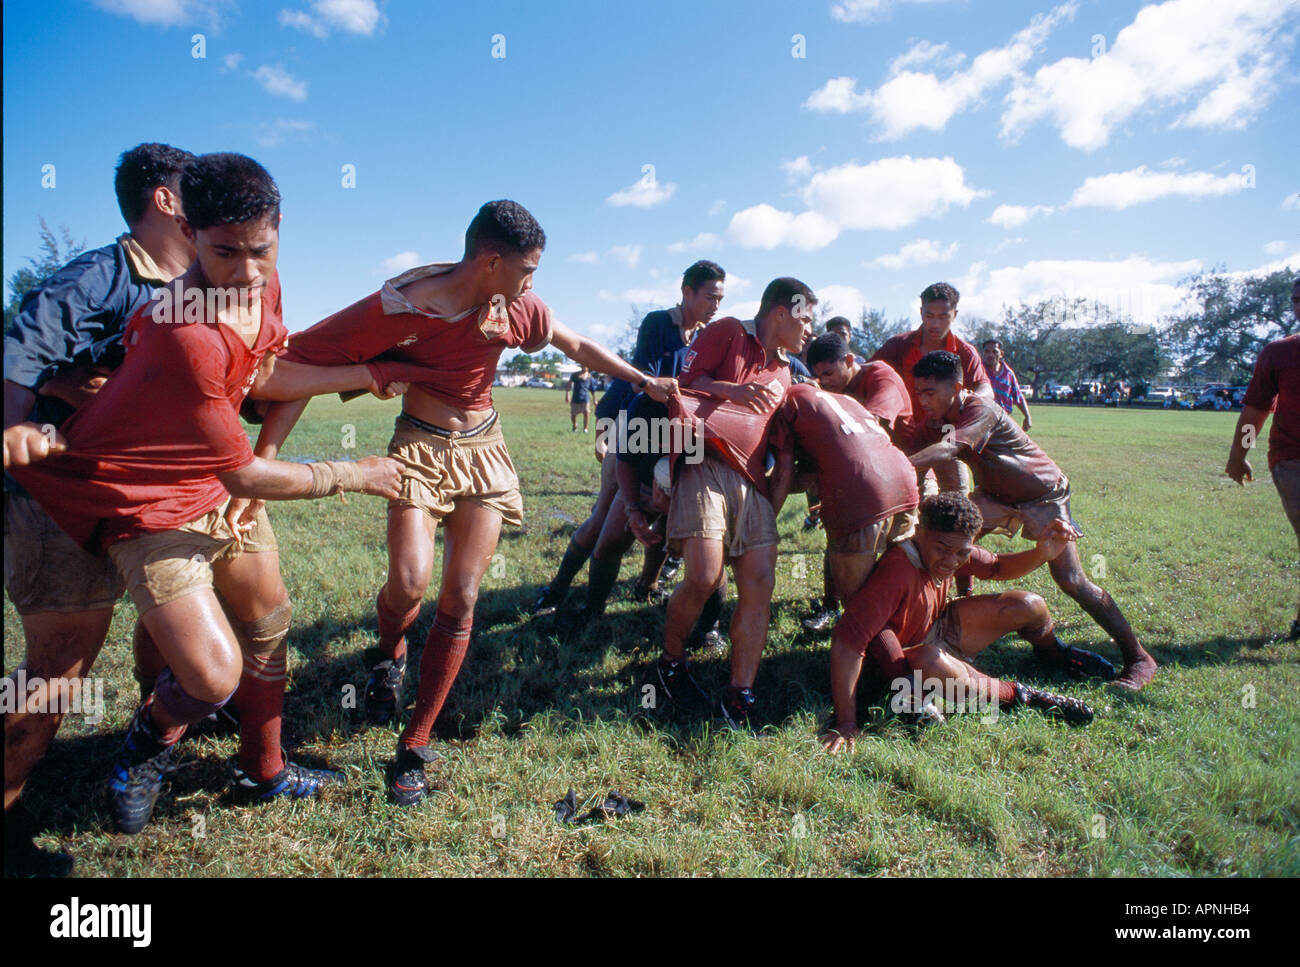 RUGBY-AKTION Stockfoto